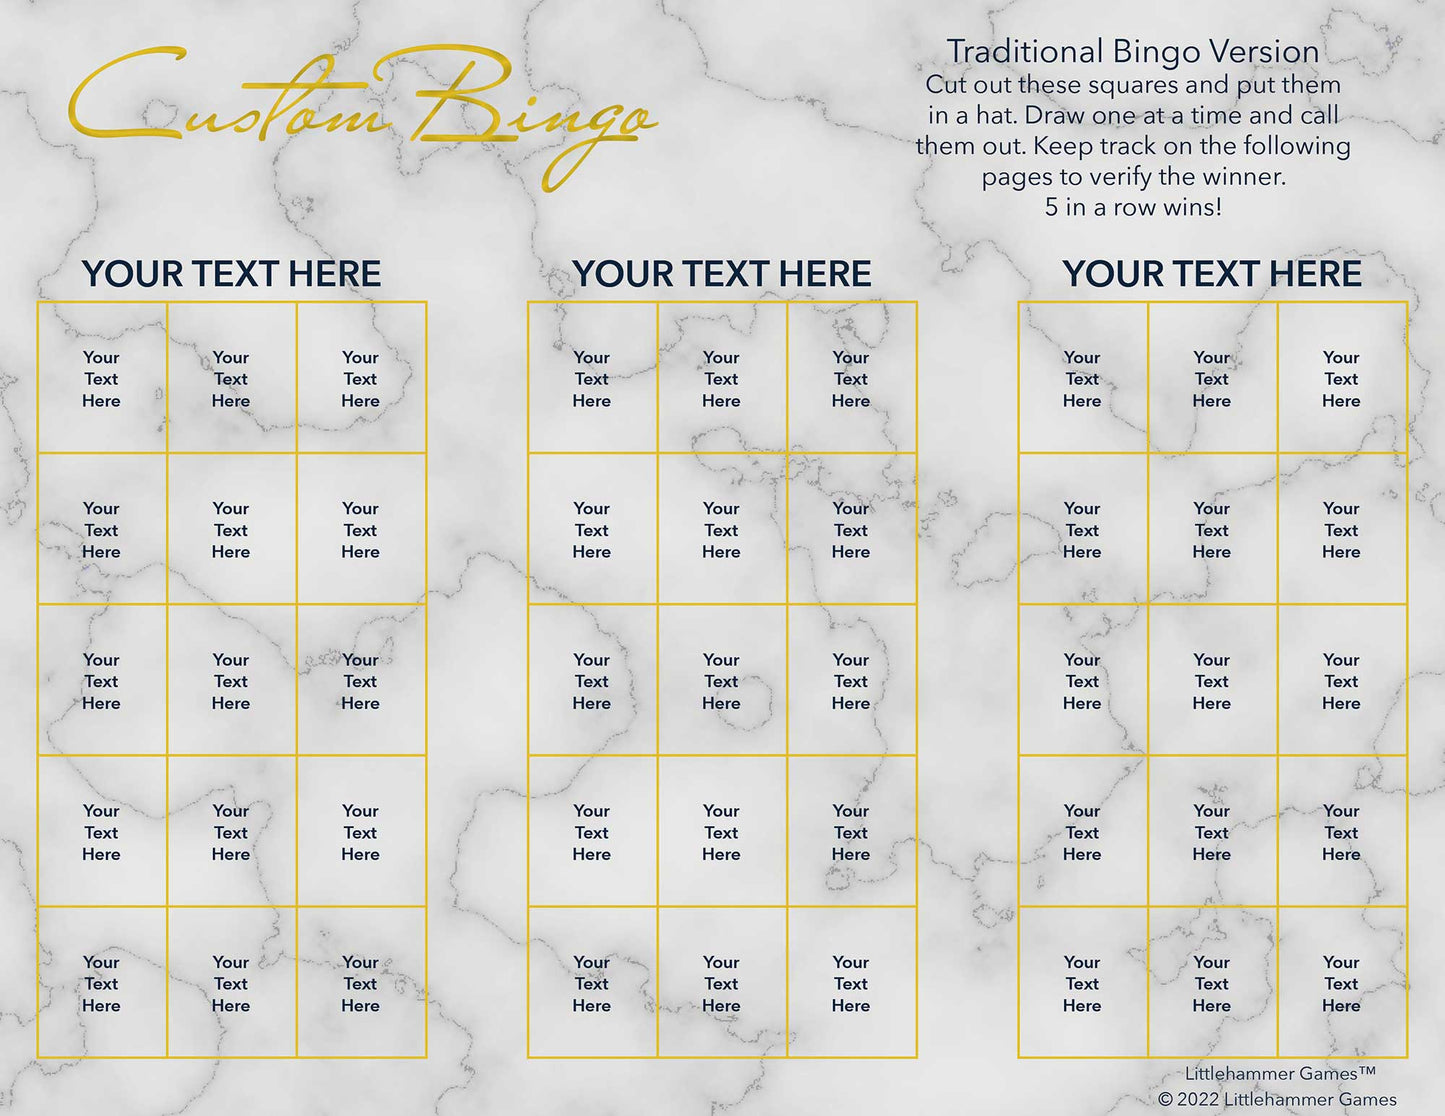 Custom Bingo calling card with gold text on a marble background